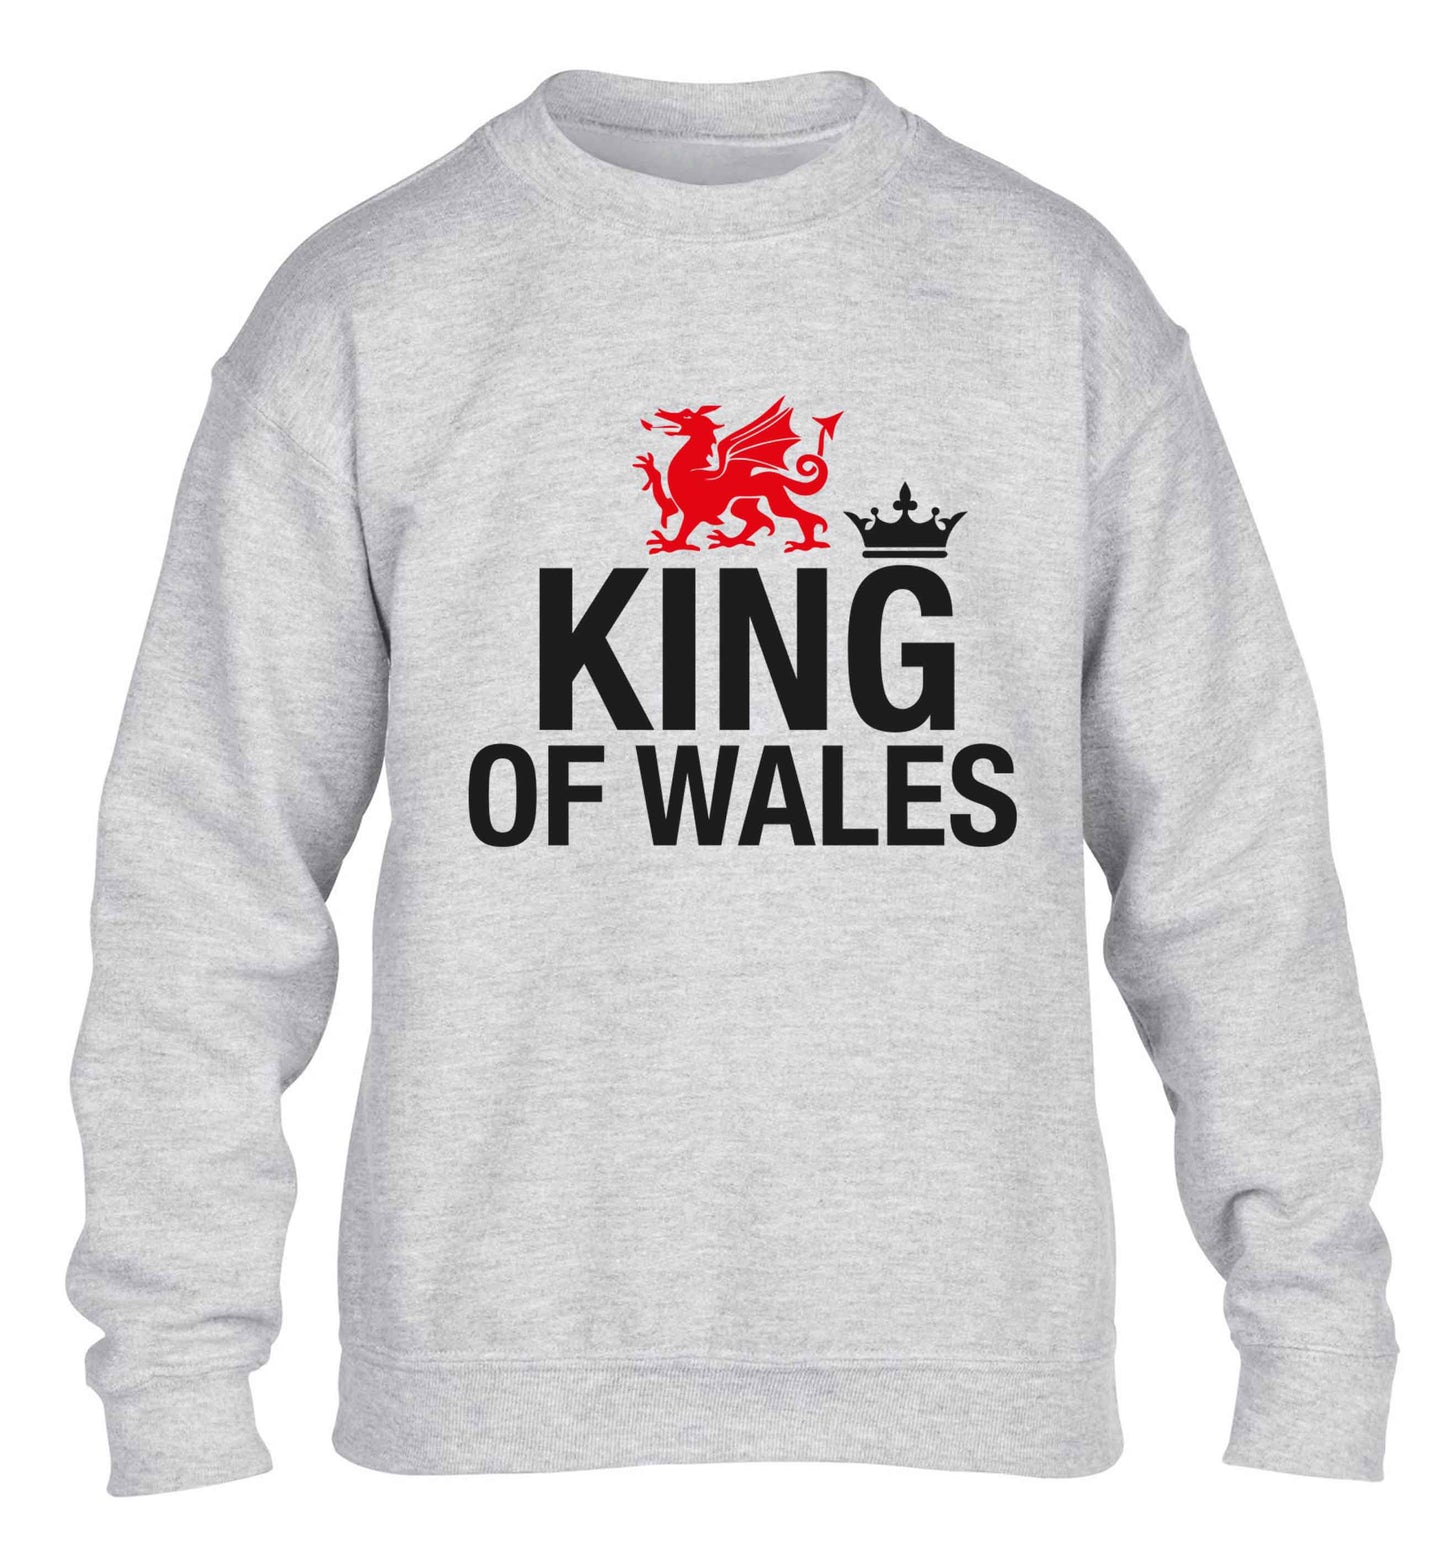 King of Wales children's grey sweater 12-13 Years